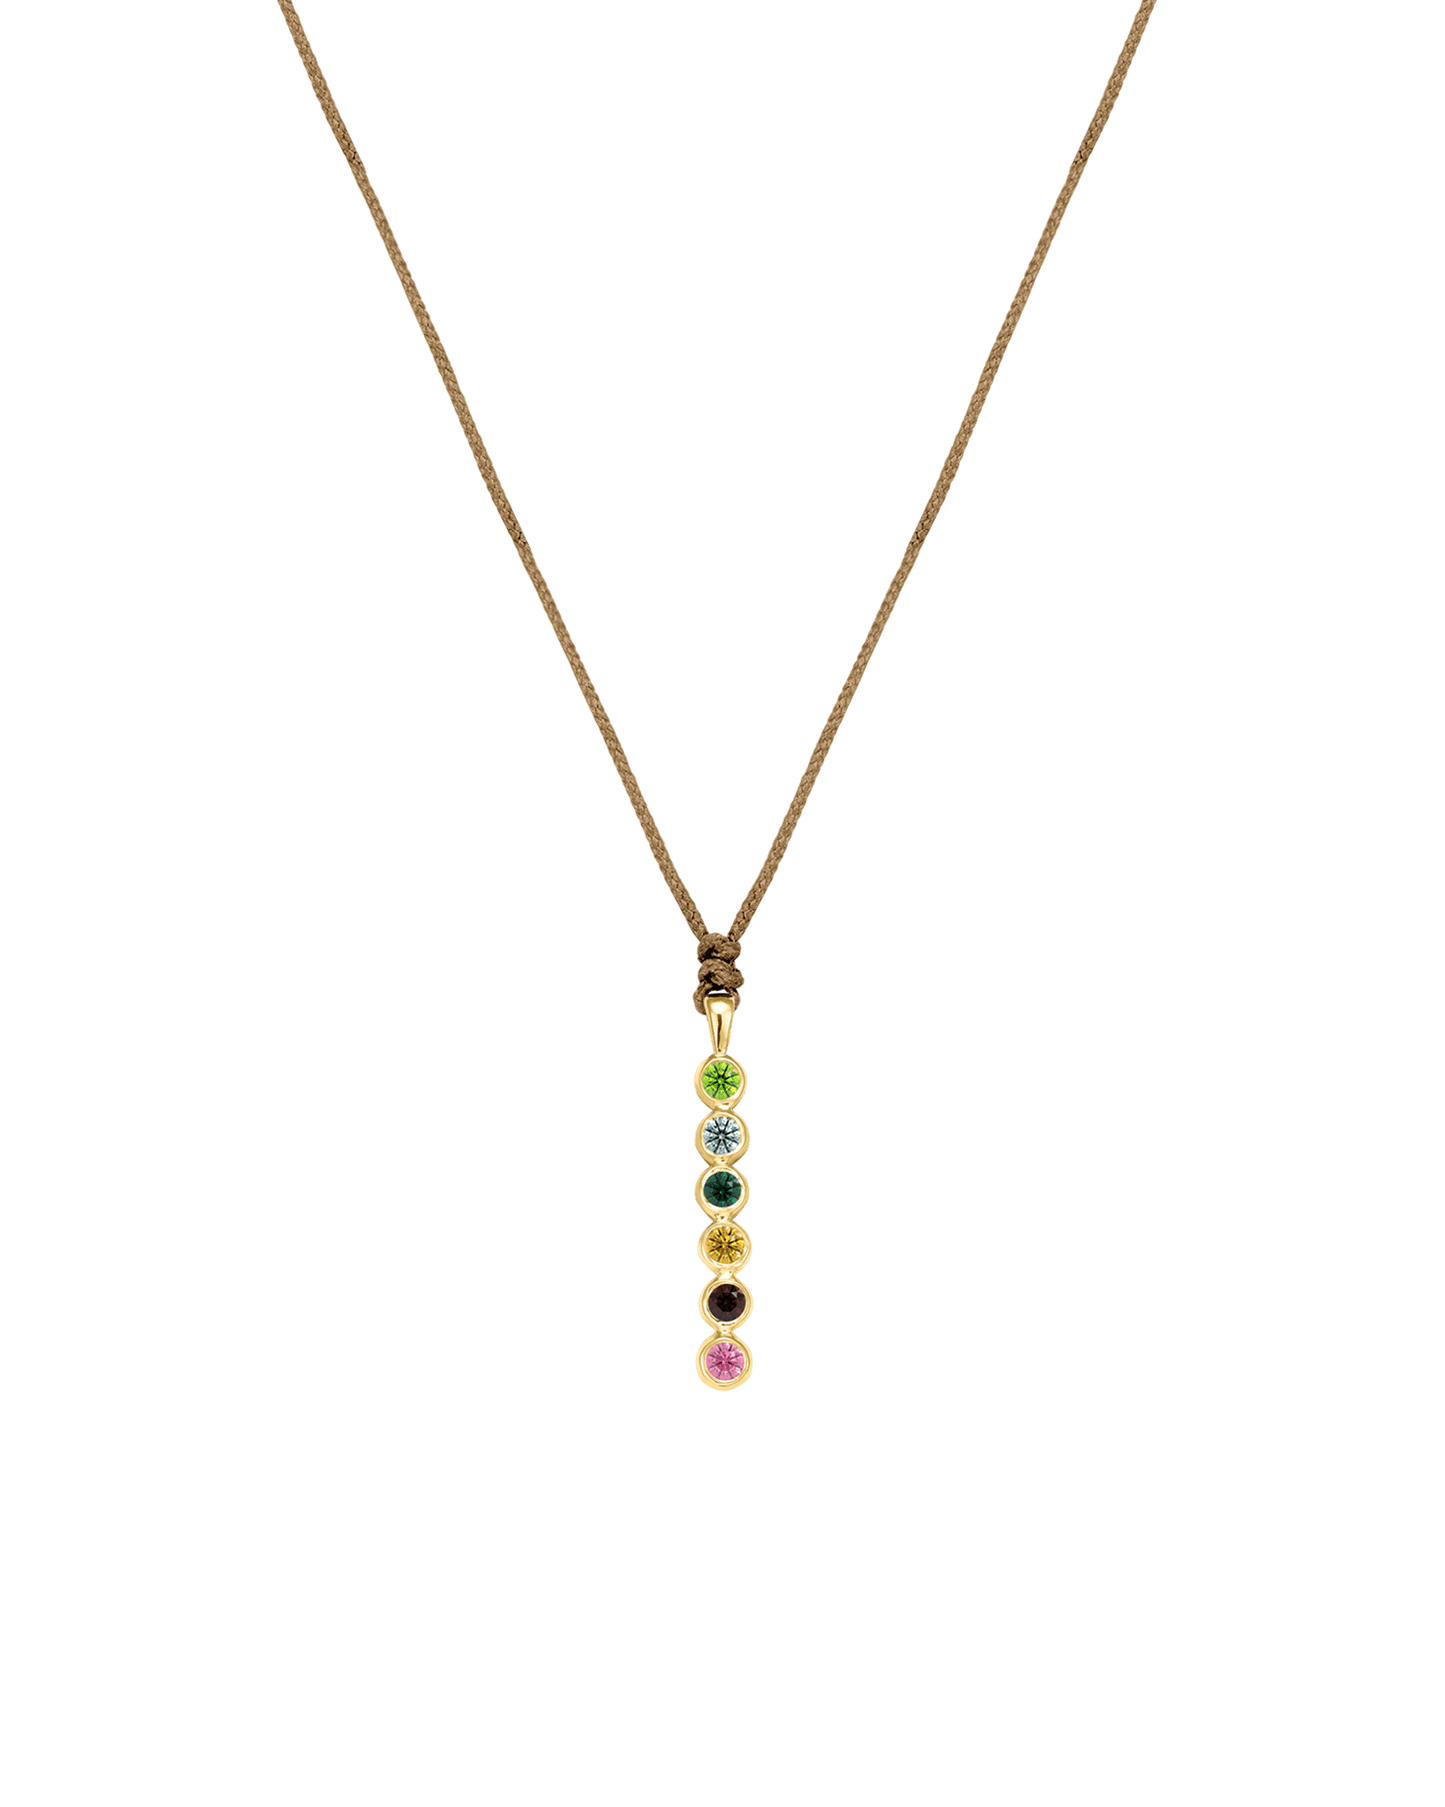 The Birthstones Bar Necklace - 14K Yellow Gold Necklaces 14K Solid Gold Camel 2 